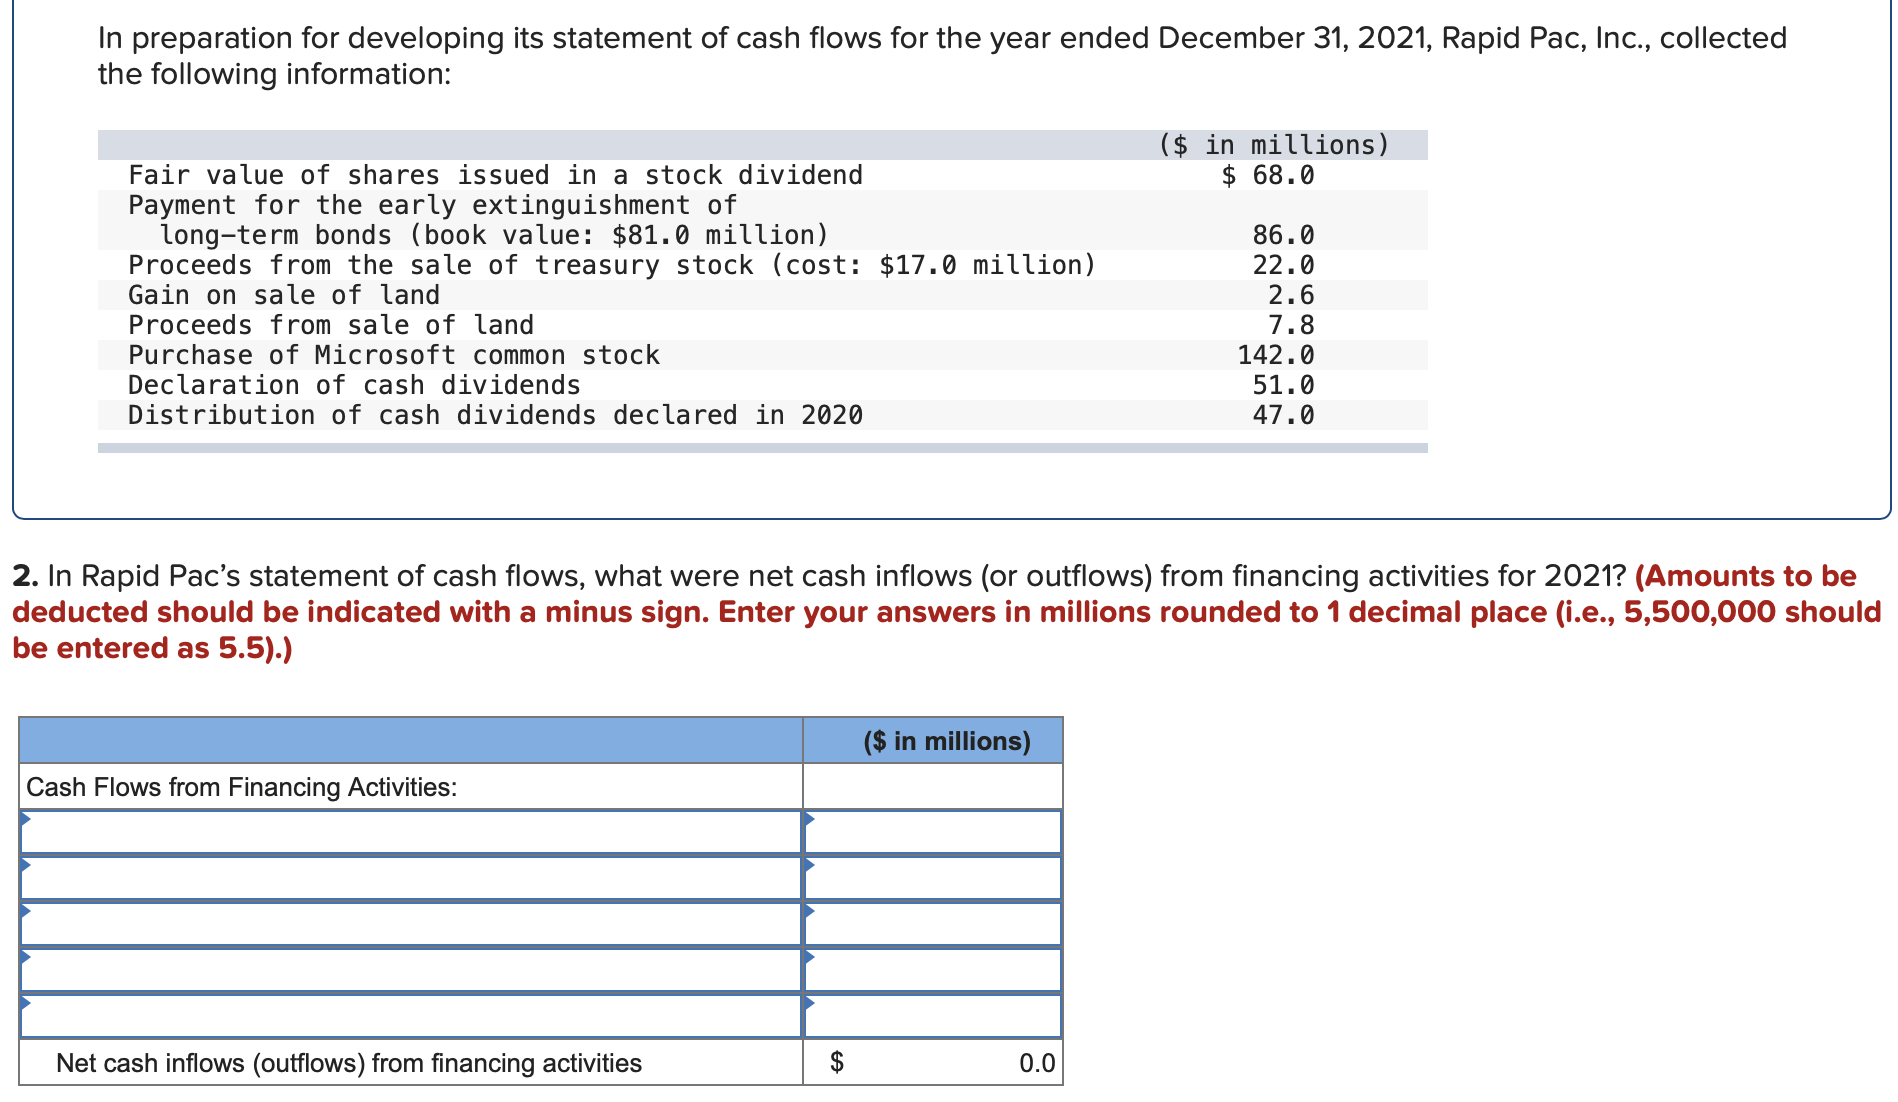 In preparation for developing its statement of cash flows for the year ended December 31, 2021, Rapid Pac, Inc., collected
the following information:
($ in millions)
$ 68.0
Fair value of shares issued in a stock dividend
Payment for the early extinguishment of
long-term bonds (book value: $81.0 million)
Proceeds from the sale of treasury stock (cost: $17.0 million)
Gain on sale of land
Proceeds from sale of land
Purchase of Microsoft common stock
Declaration of cash dividends
Distribution of cash dividends declared in 2020
86.0
22.0
2.6
7.8
142.0
51.0
47.0
2. In Rapid Pac's statement of cash flows, what were net cash inflows (or outflows) from financing activities for 2021? (Amounts to be
deducted should be indicated with a minus sign. Enter your answers in millions rounded to 1 decimal place (i.e., 5,500,000 should
be entered as 5.5).)
